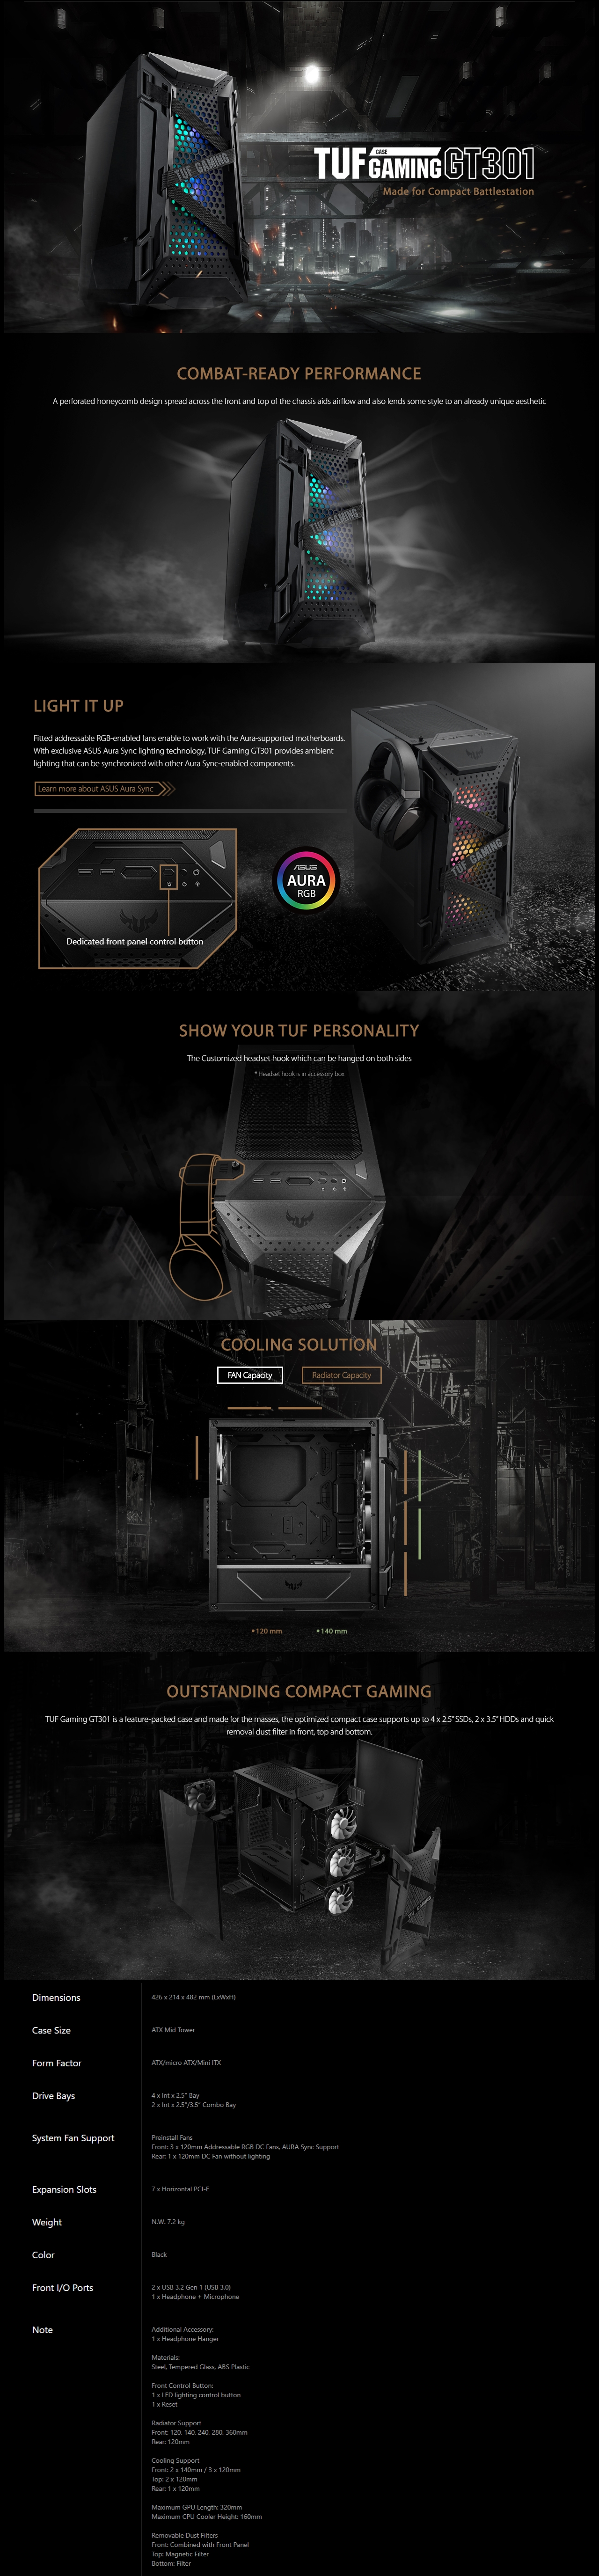 A large marketing image providing additional information about the product ASUS TUF Gaming GT301 Mid Tower Case - Black - Additional alt info not provided